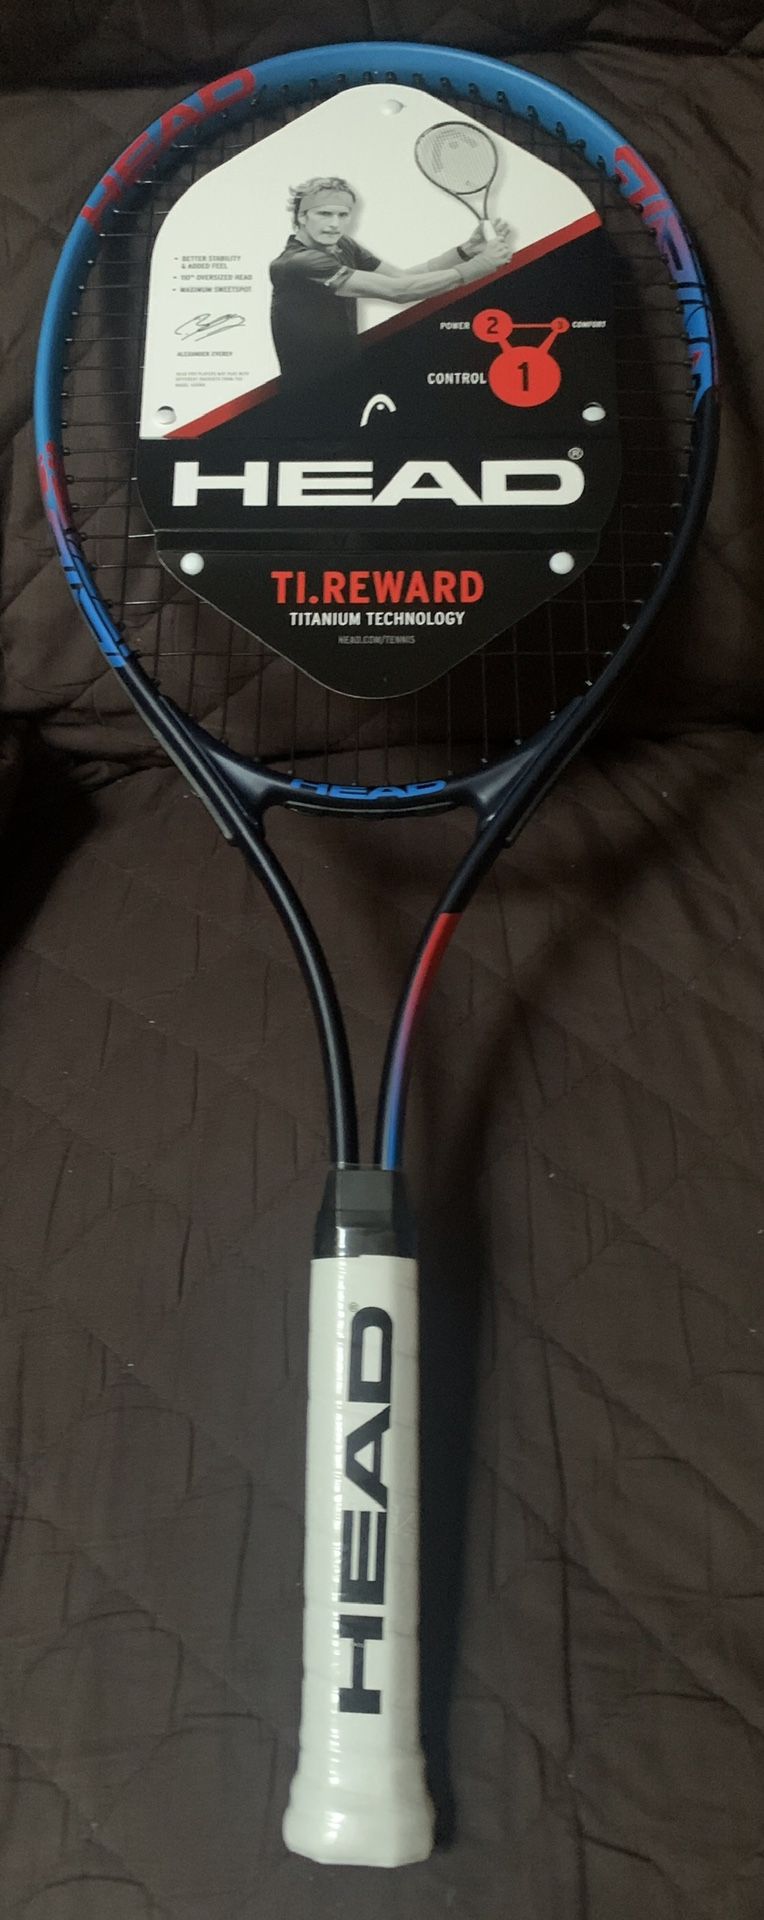 Brand New Head Tennis Rackets Never Used Still Packaged